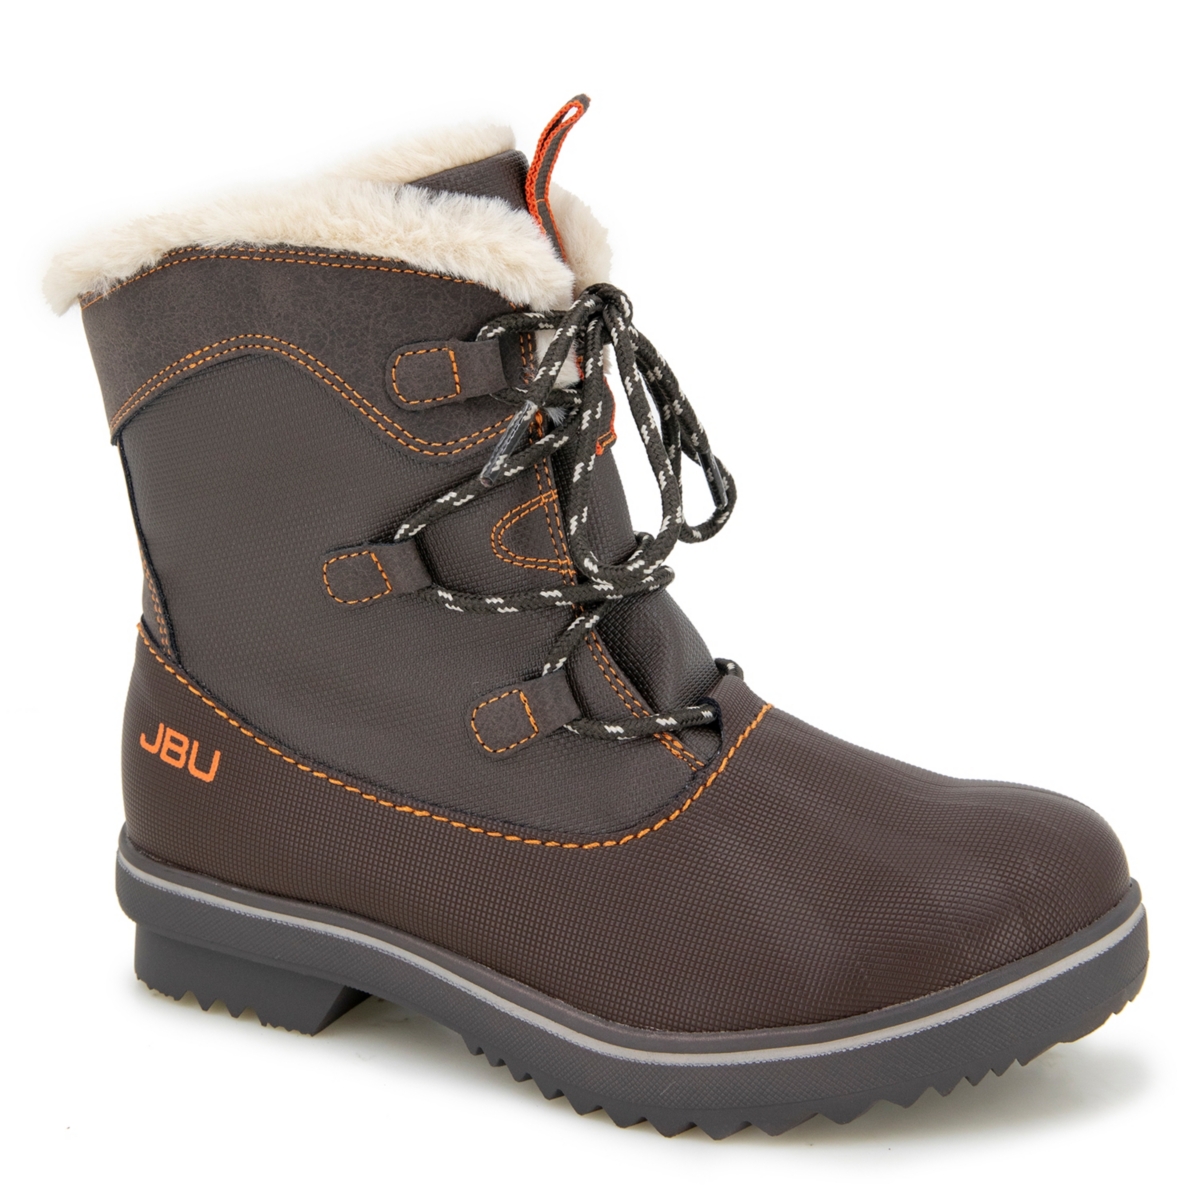 Brisky Lace-Up Casual Water-resistant Boots - Brown